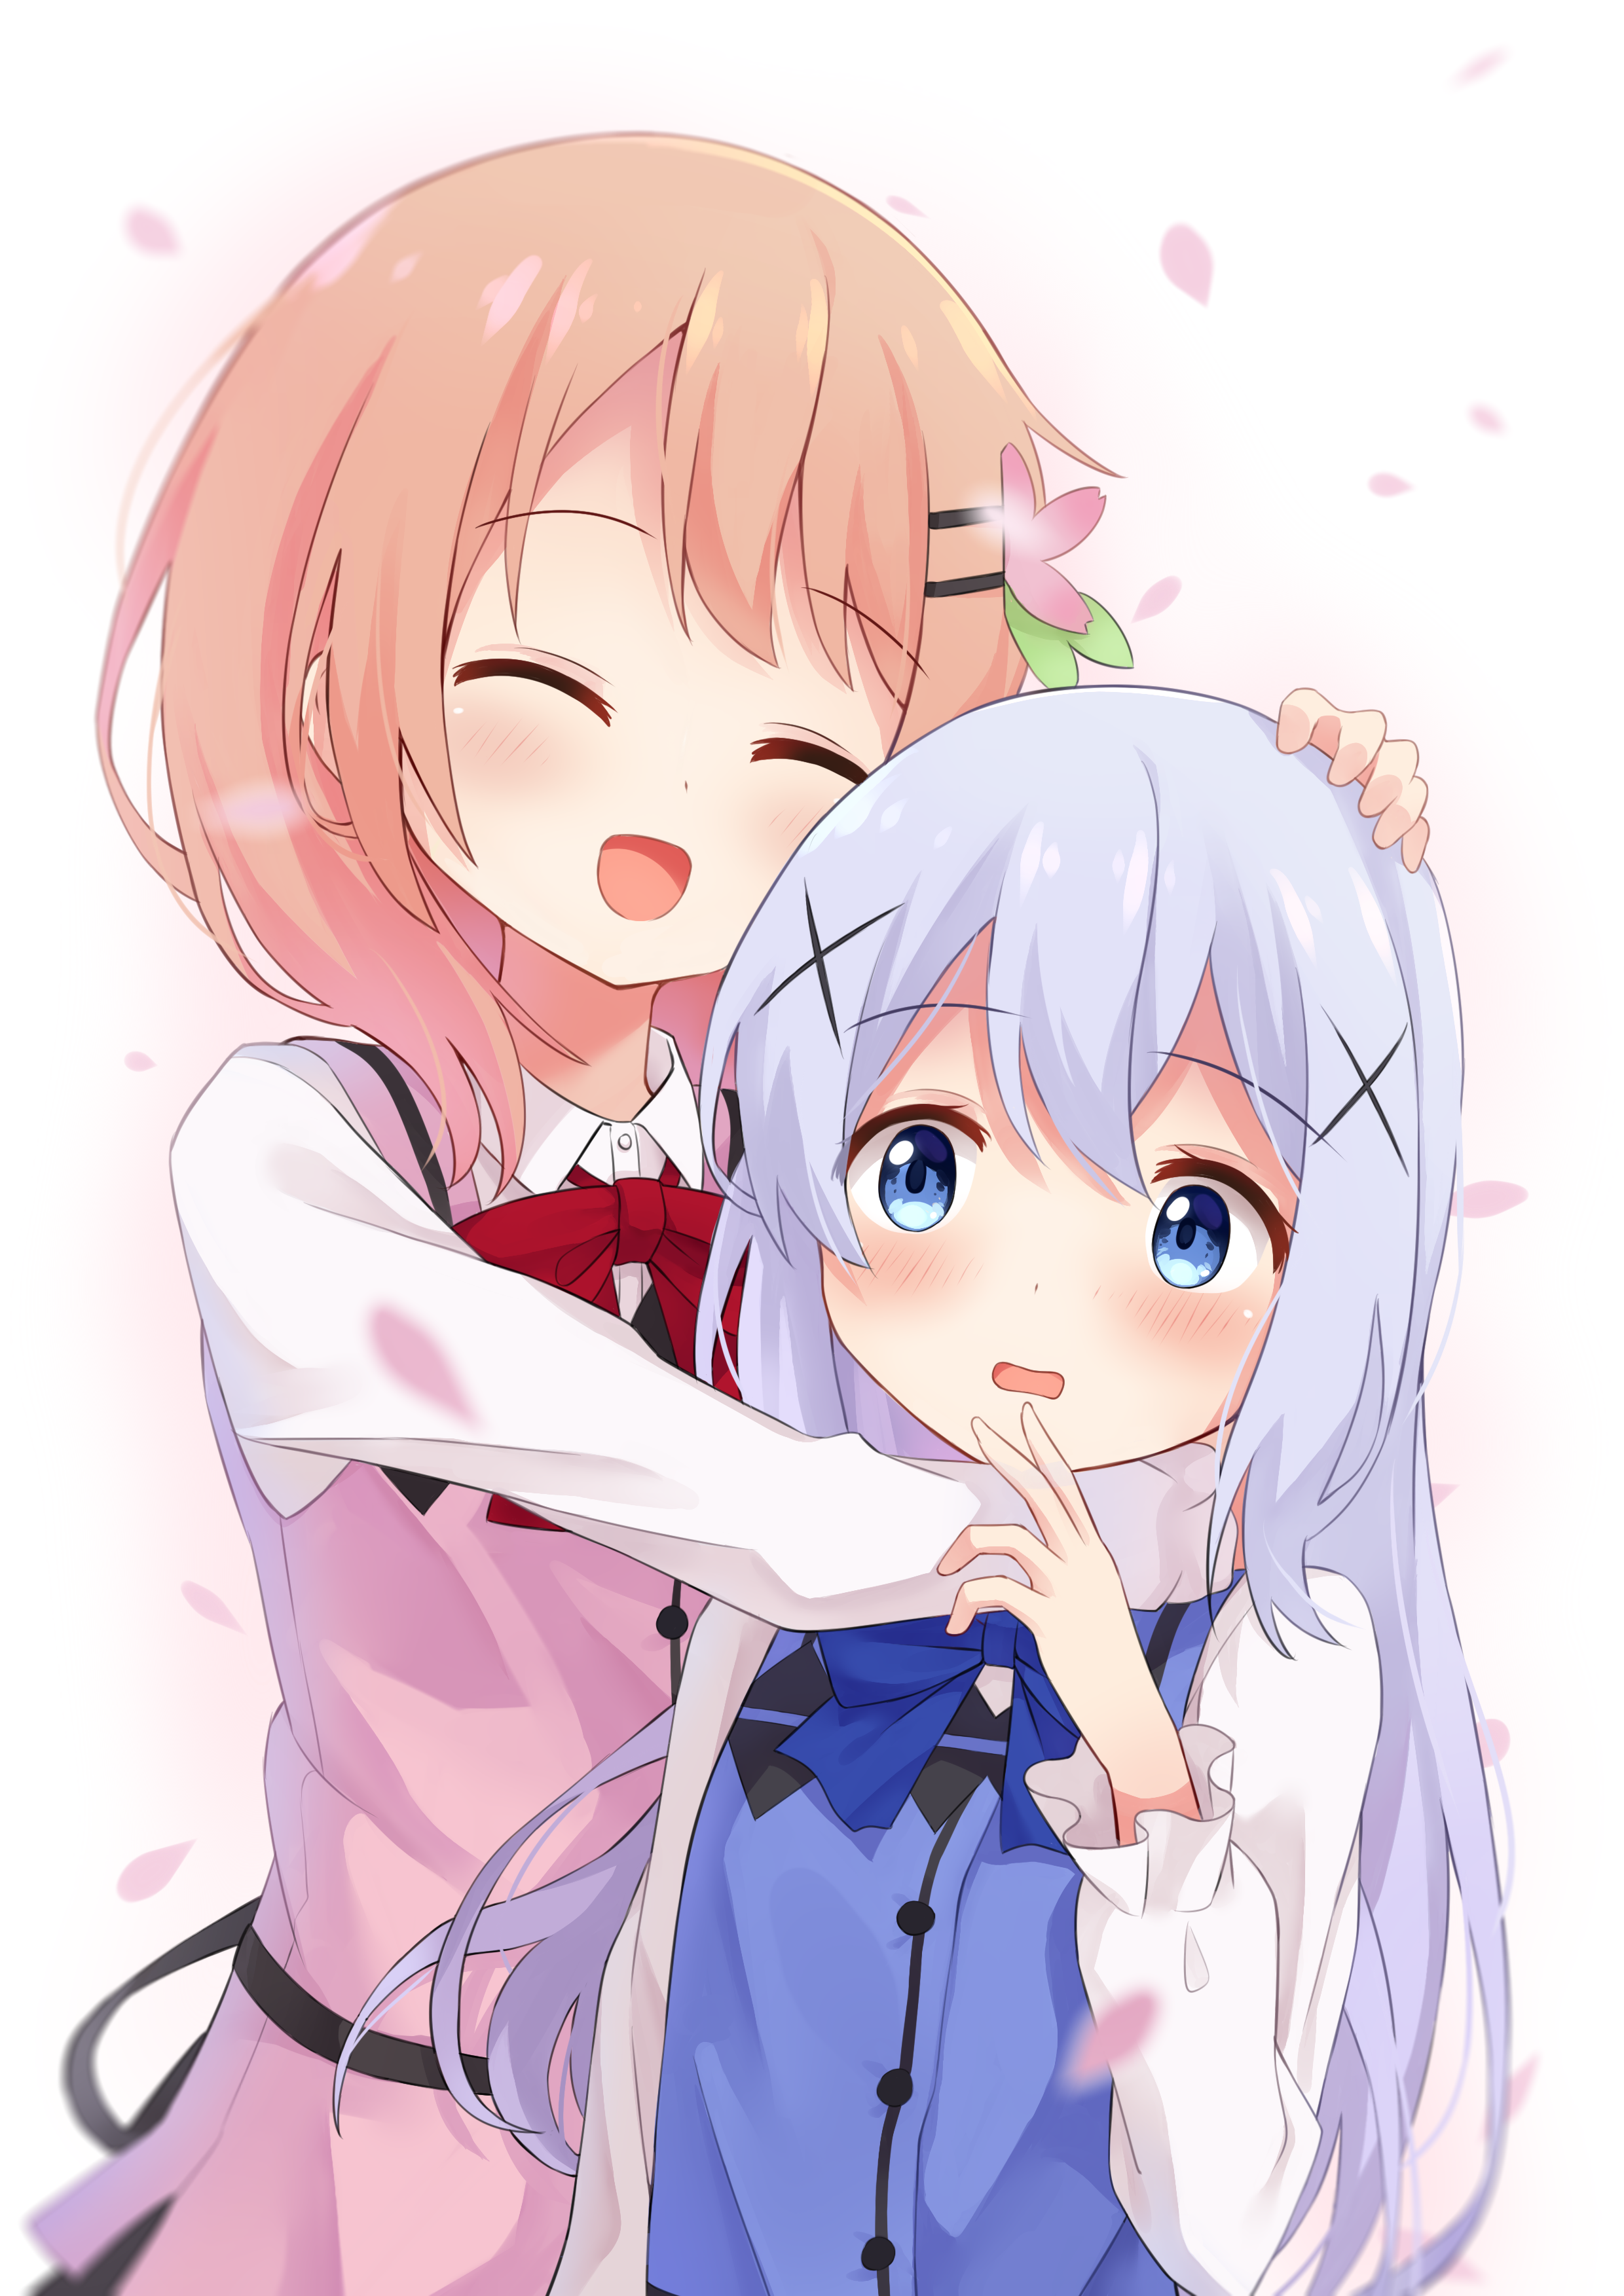 Chino and Cocoa插画图片壁纸